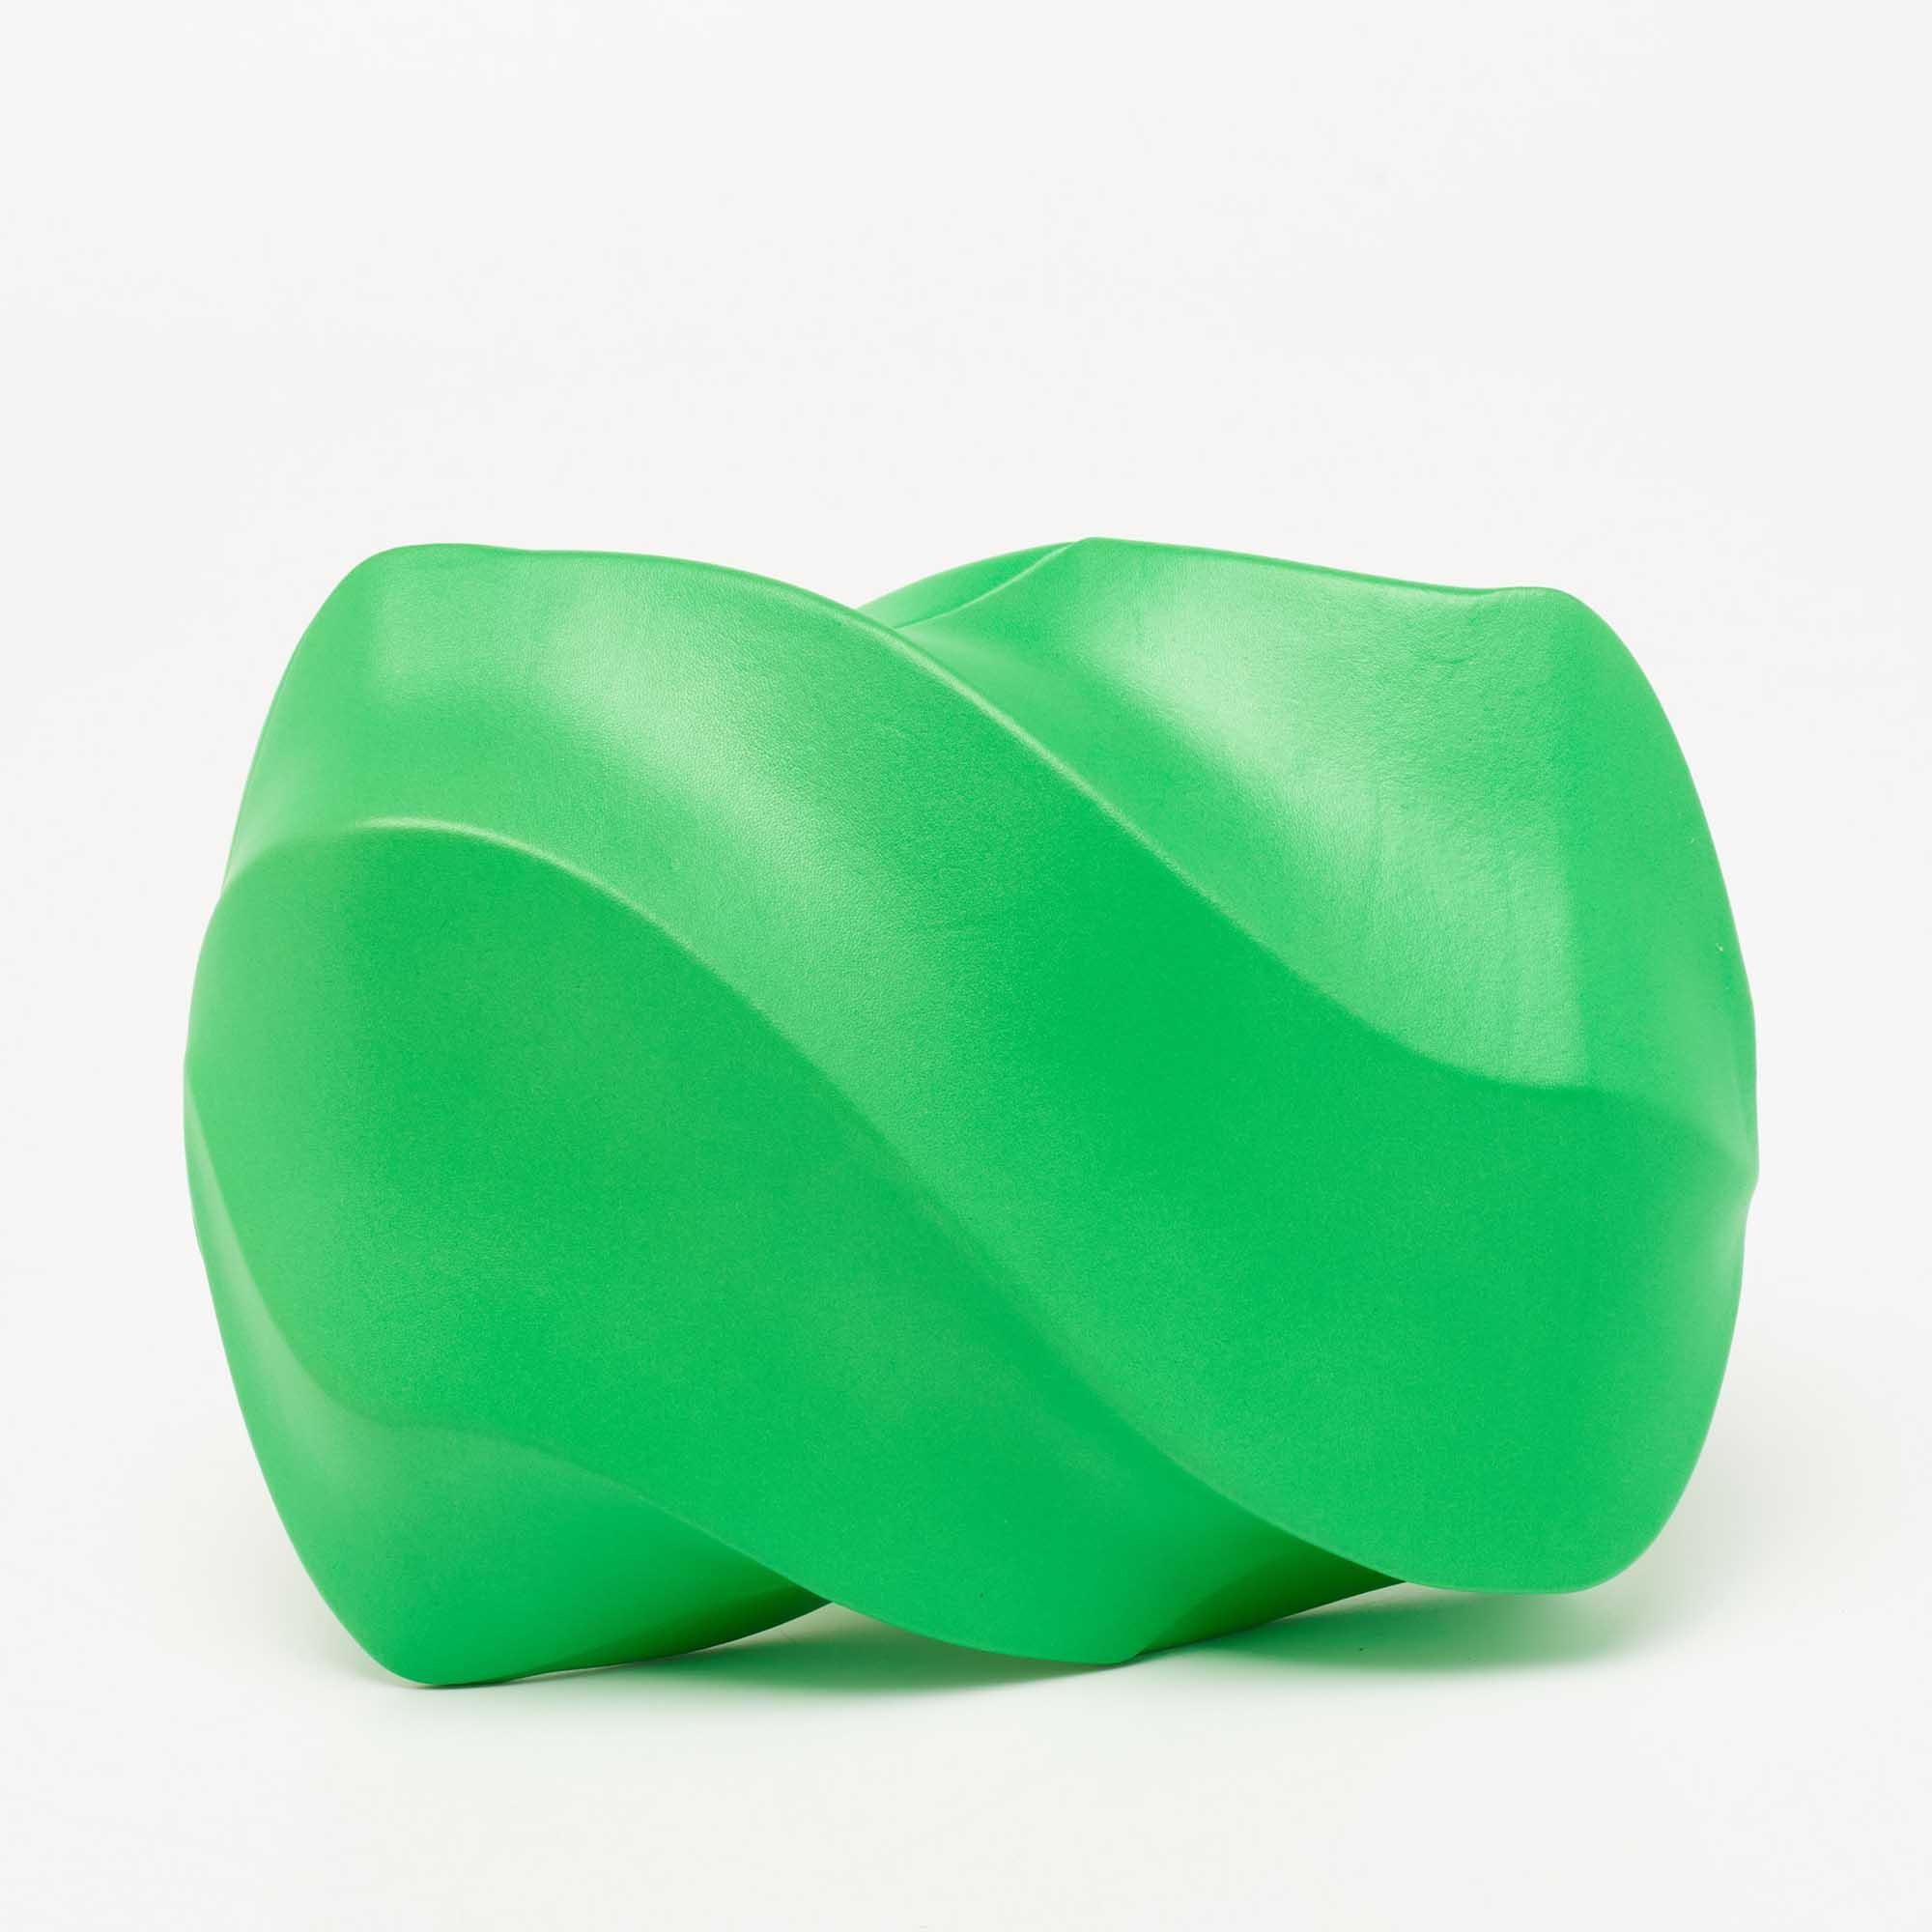 Beautifully curvy, uniquely Bottega! The BV Whirl clutch is aptly named as it is defined by smooth swirls sculpted meticulously using leather. This version in stunning green has a compact size and a magnetic closure that's concealed to maintain the